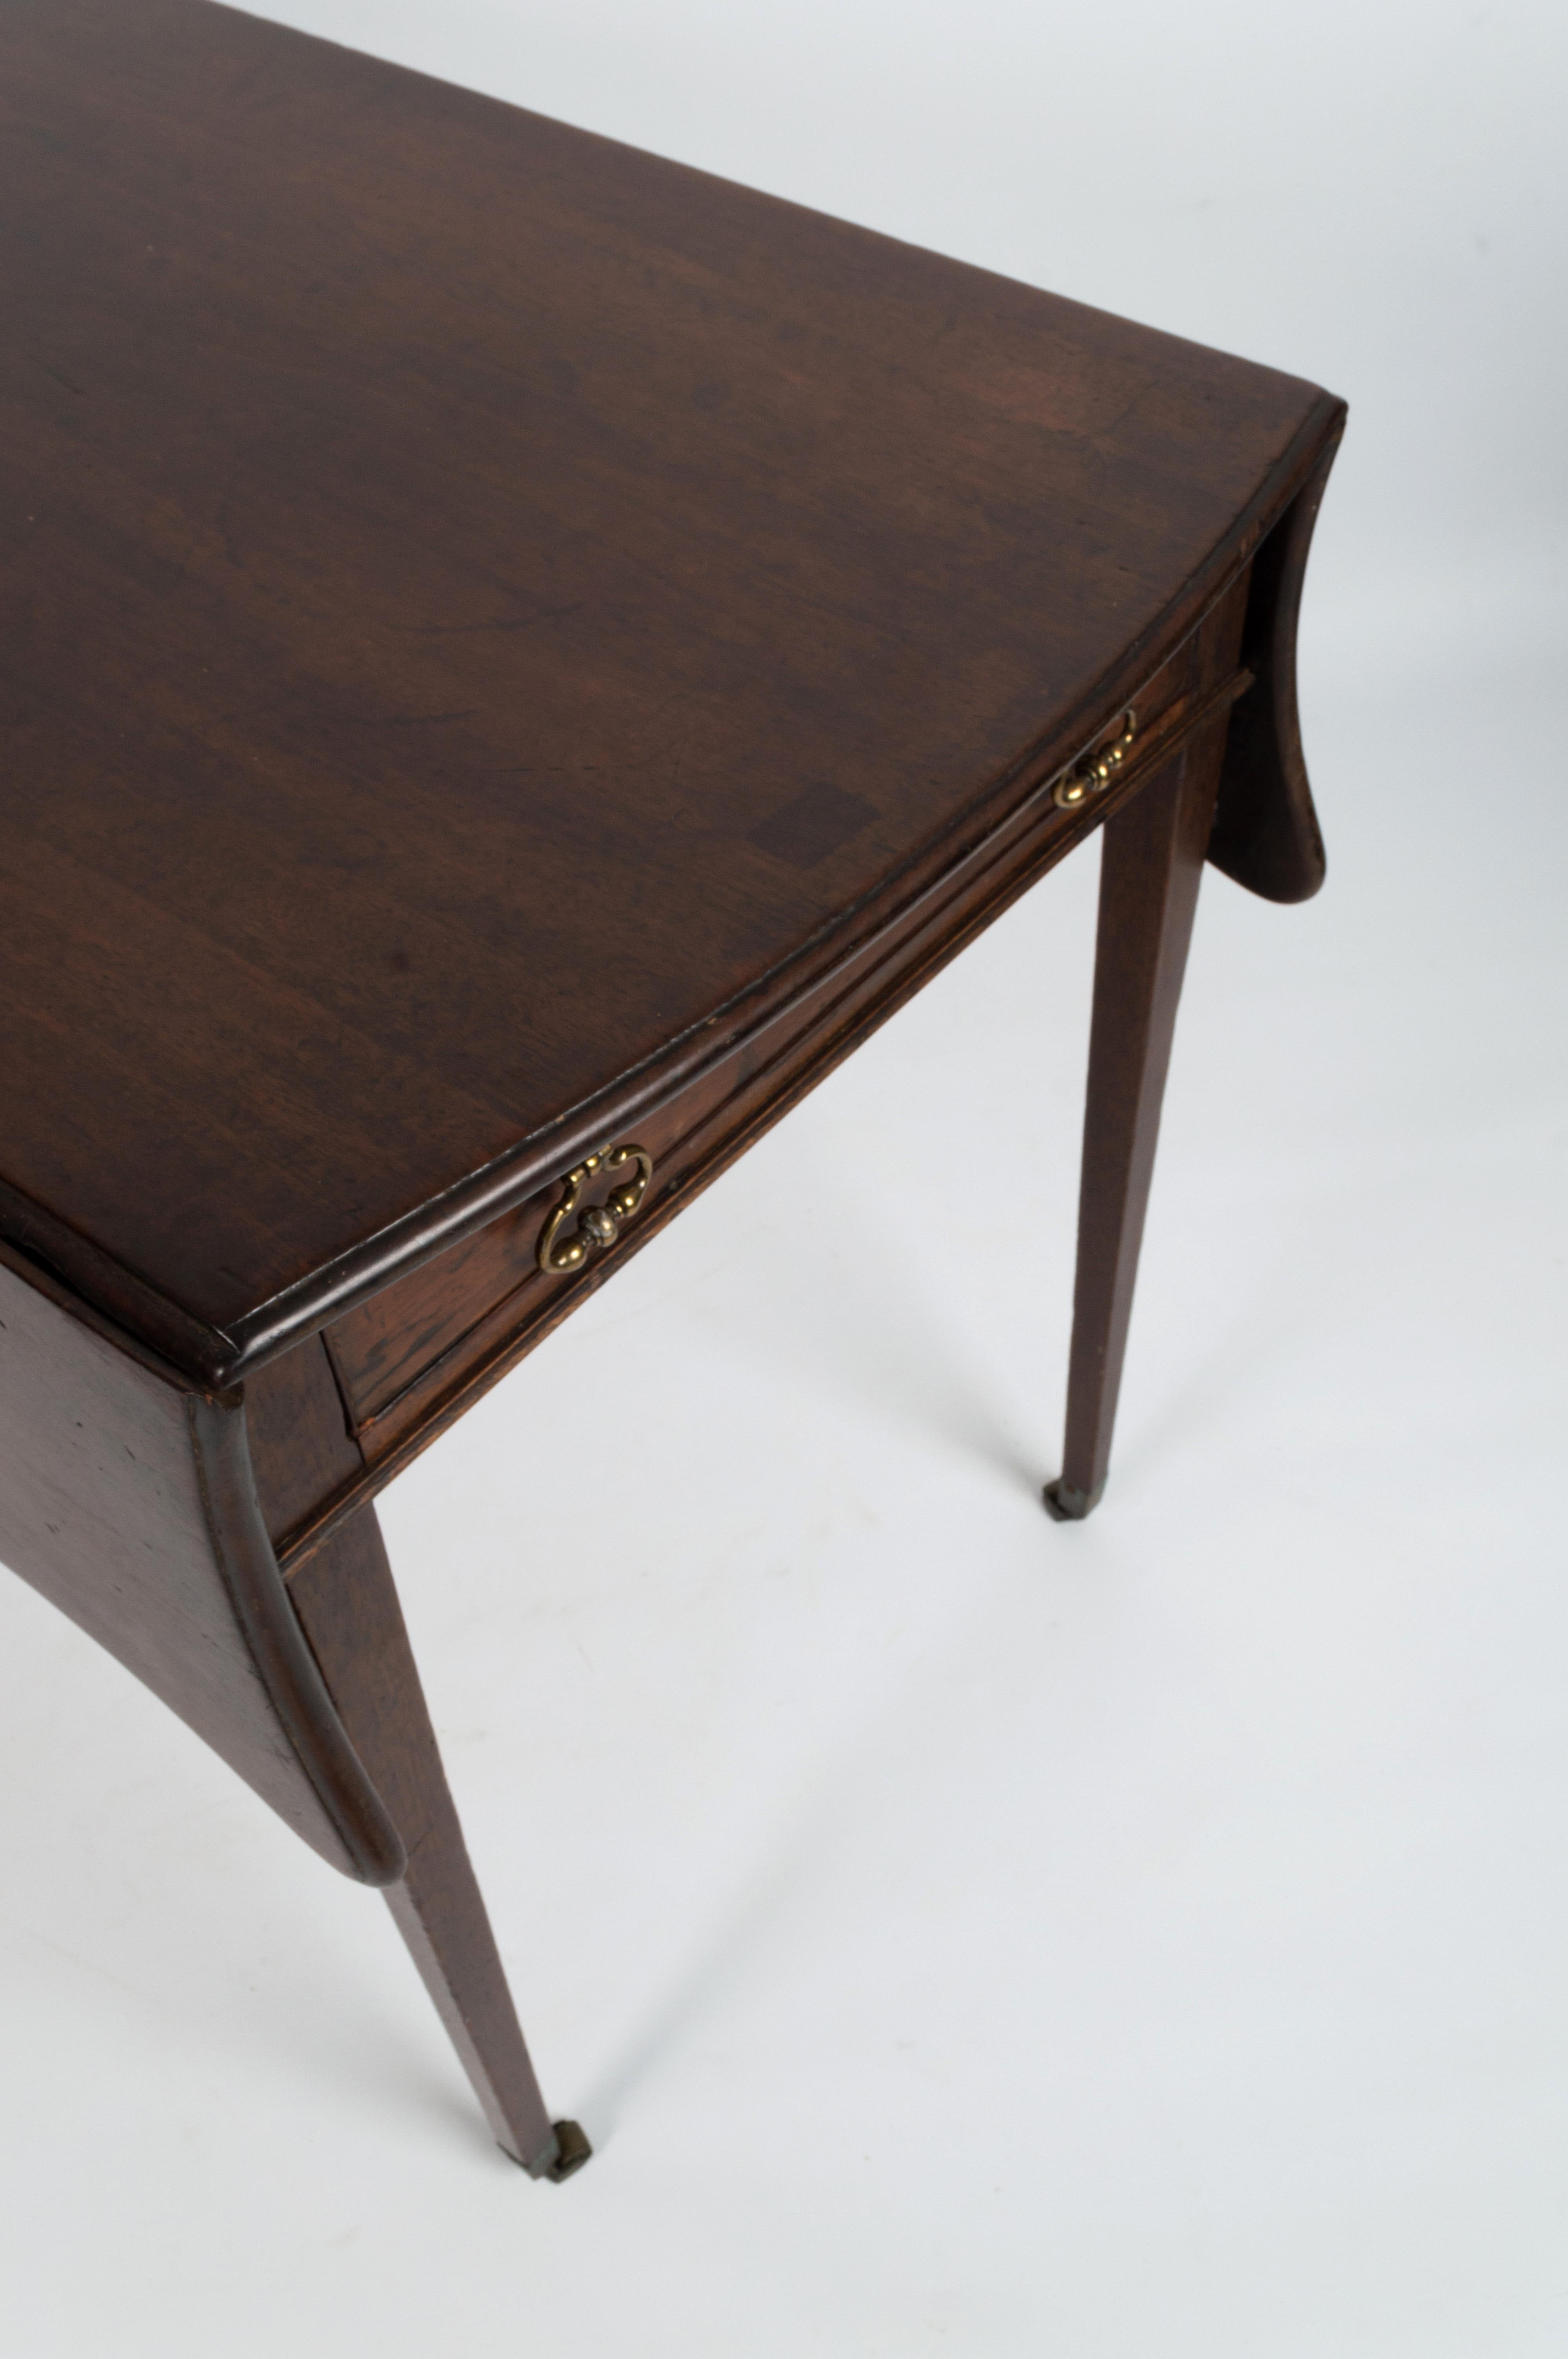 Antique English 18th Century George III Mahogany Butterfly Pembroke Table C.1780 For Sale 8